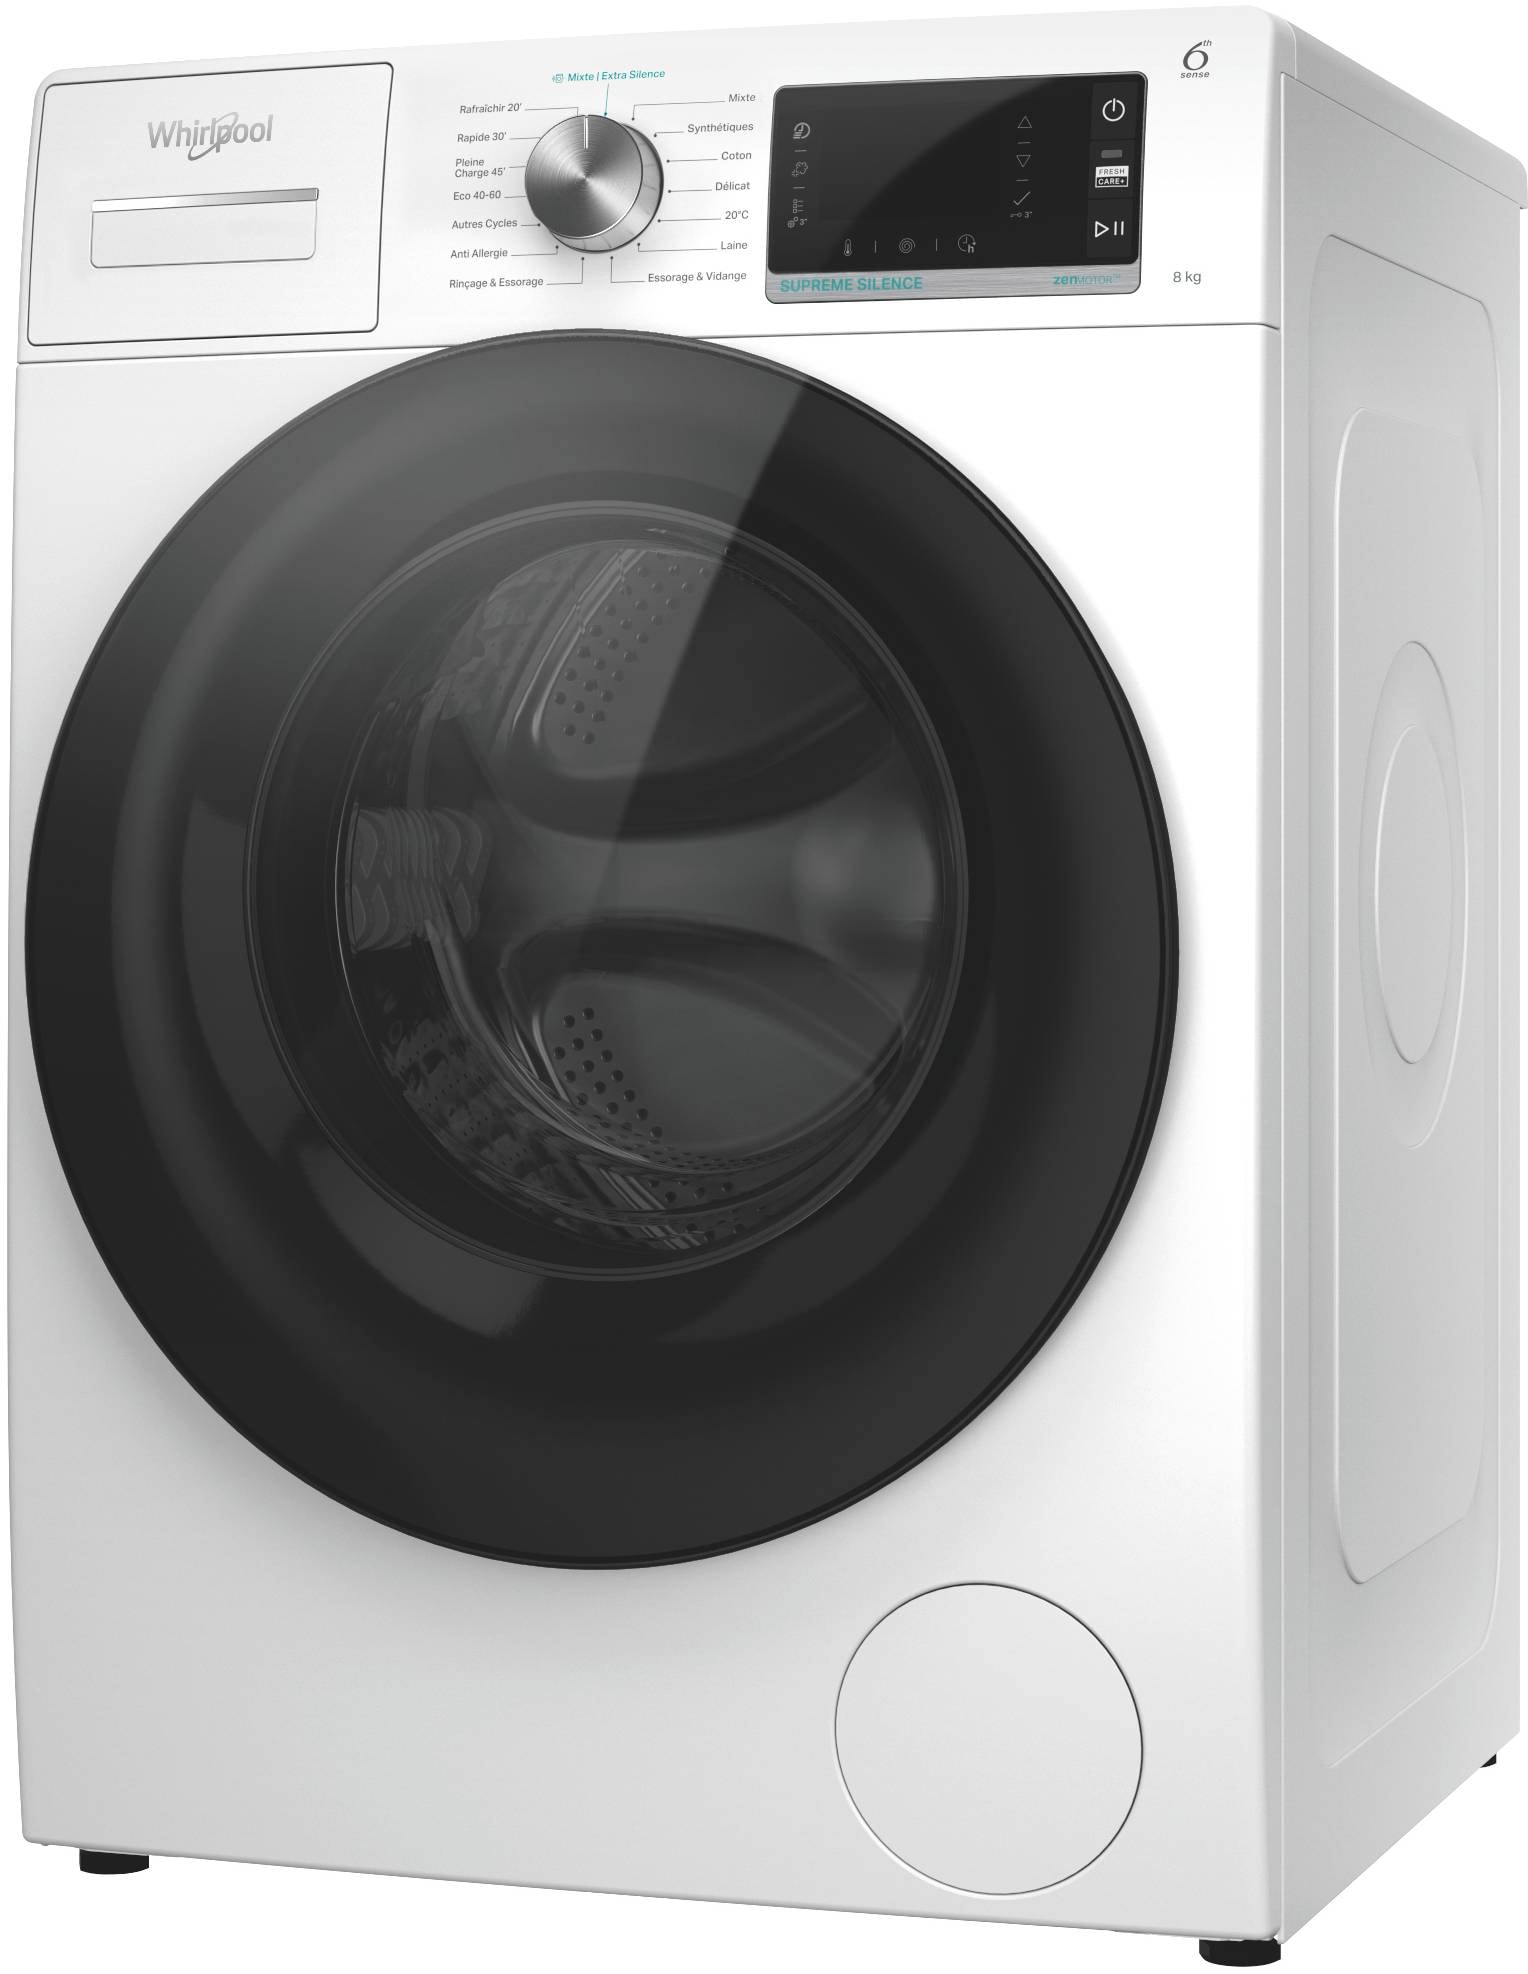 Lave linge Frontal WHIRLPOOL W6W845WBFR Pas Cher 